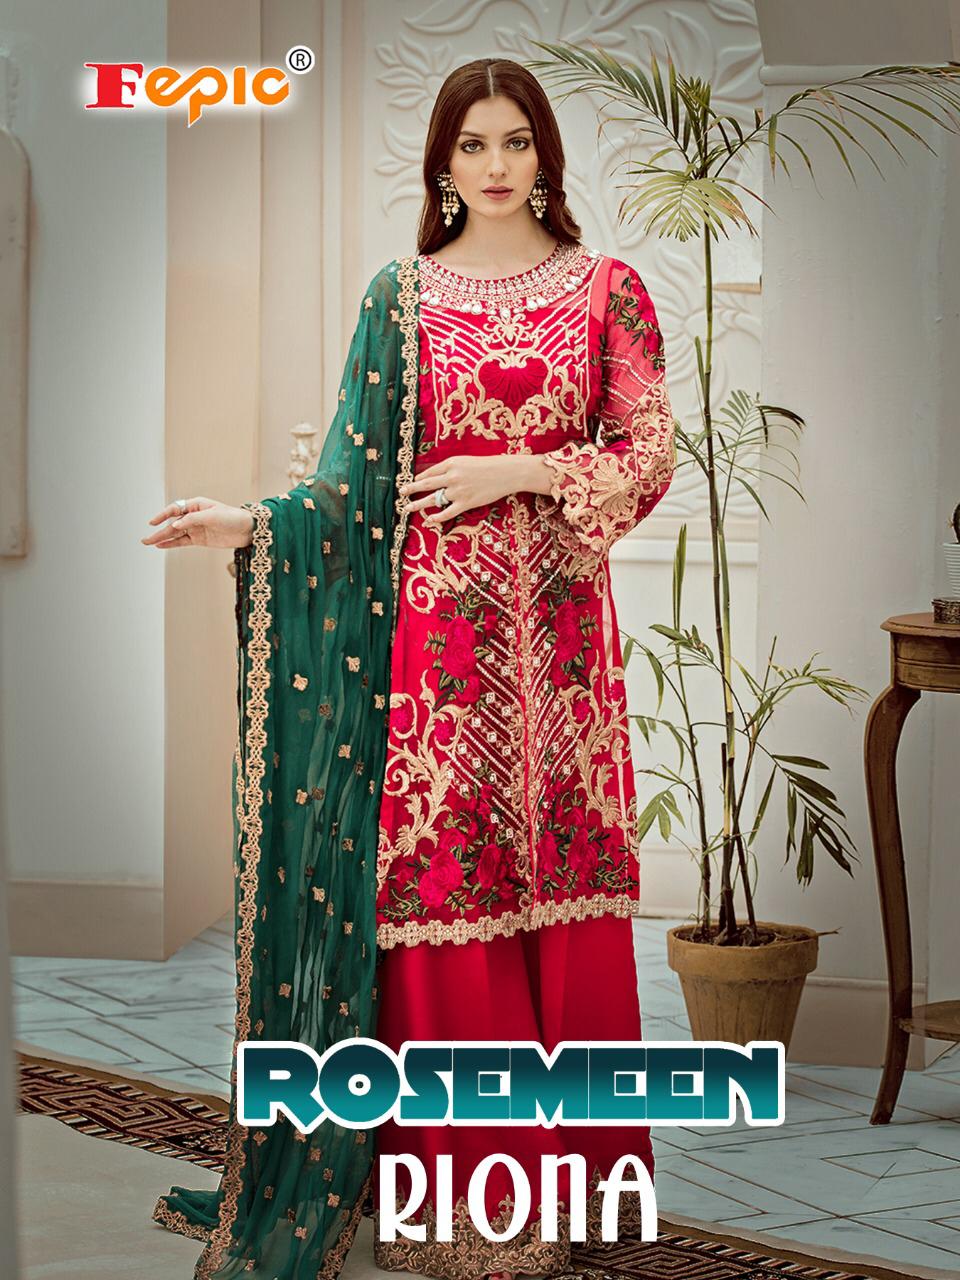 Fepic Rosemeen Riona Georgette And Net With Embroidery Work ...